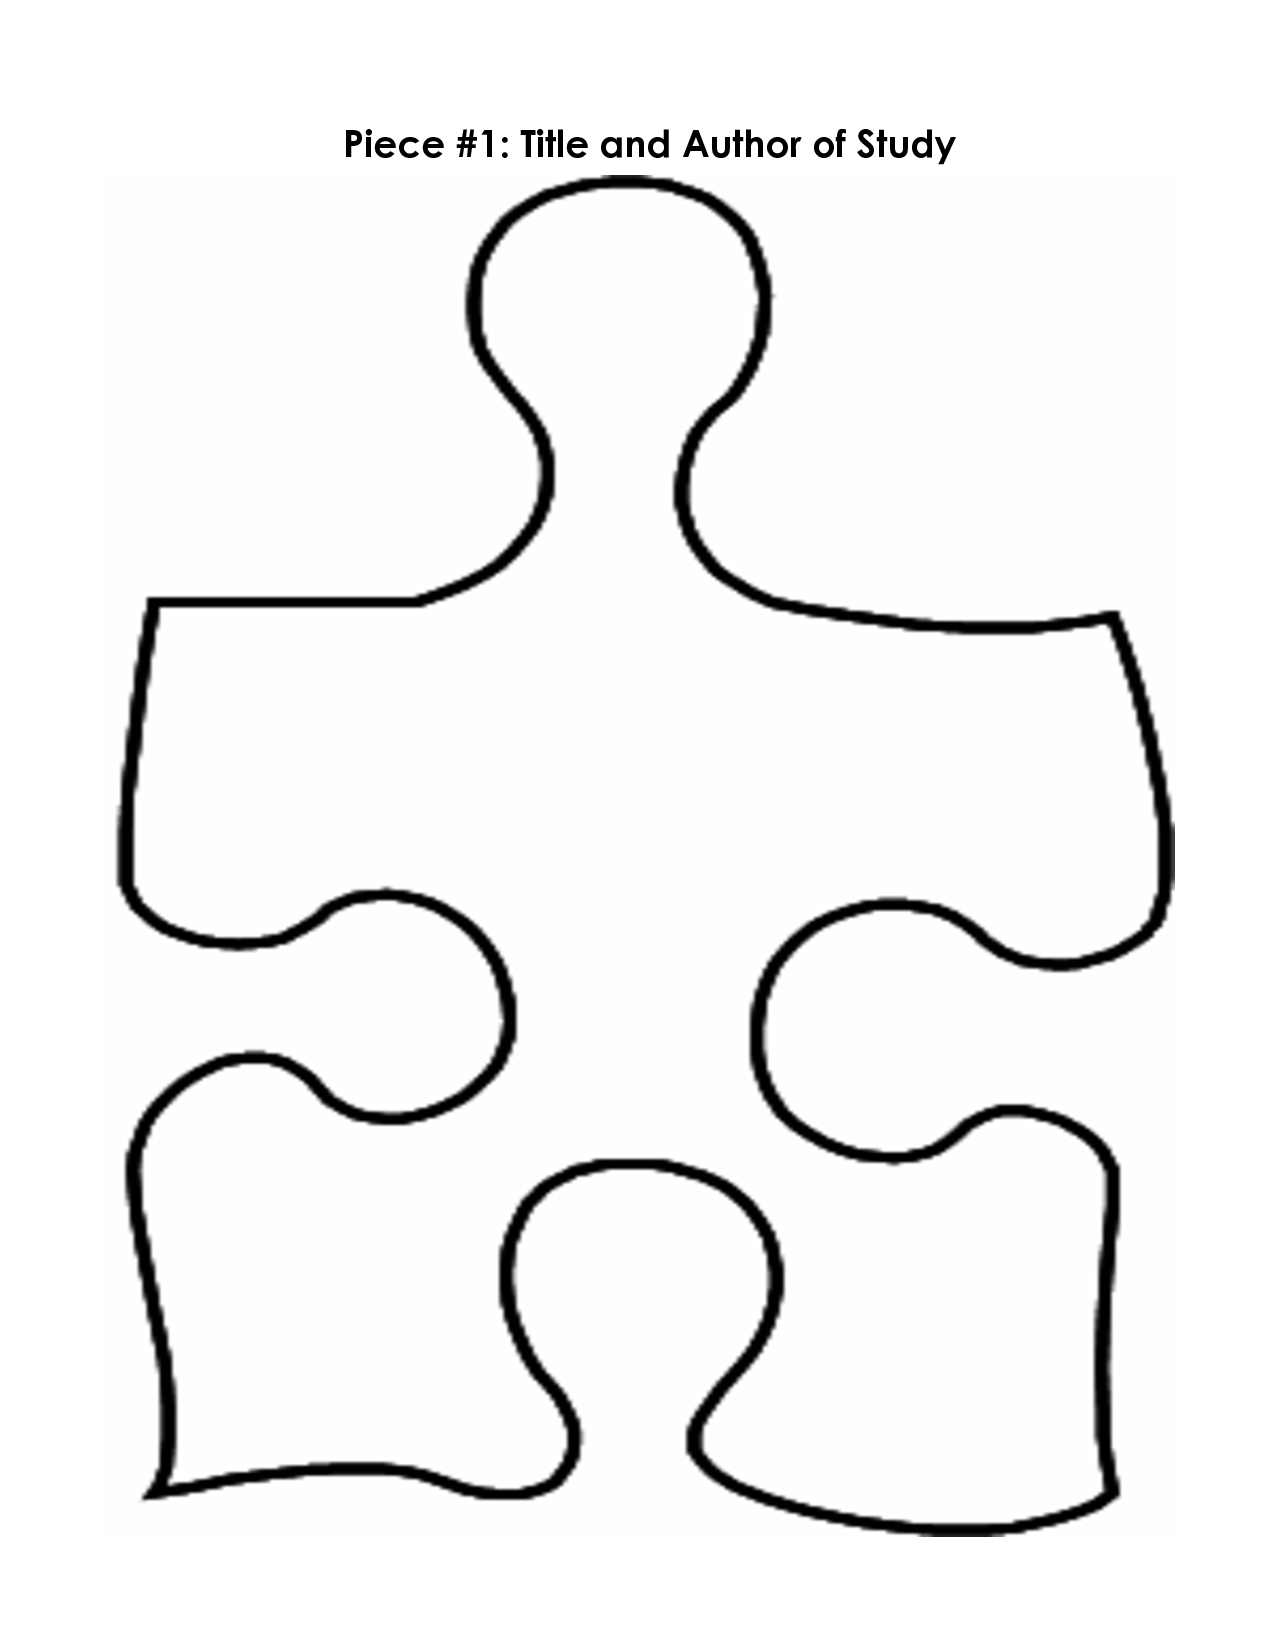 Free Puzzle Pieces Template, Download Free Clip Art, Free Clip Art - Printable 3 Puzzle Pieces